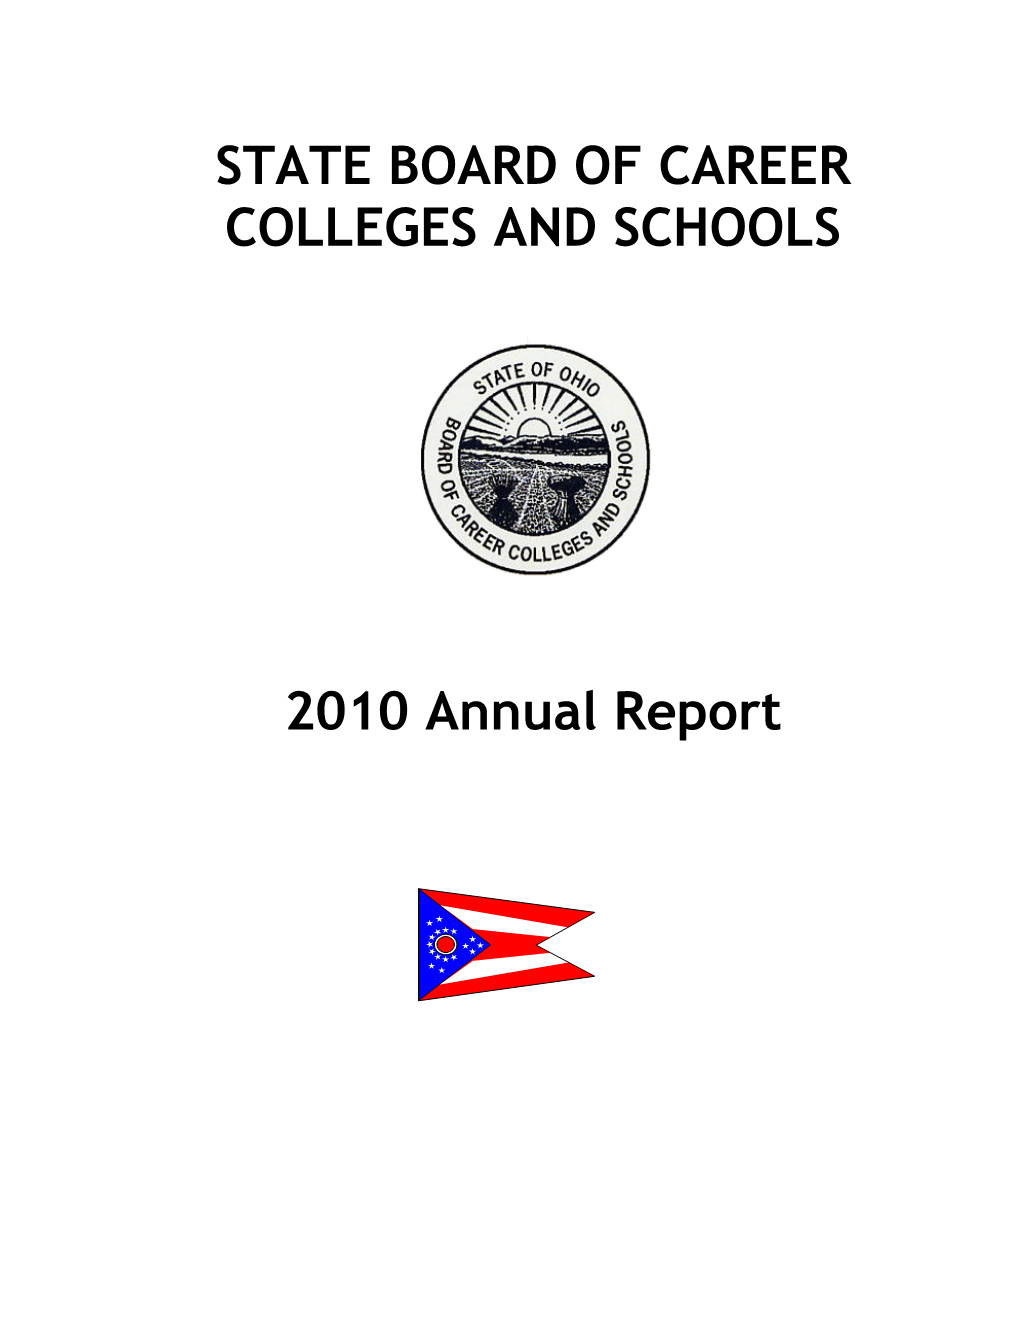 Annual Report FY 2010